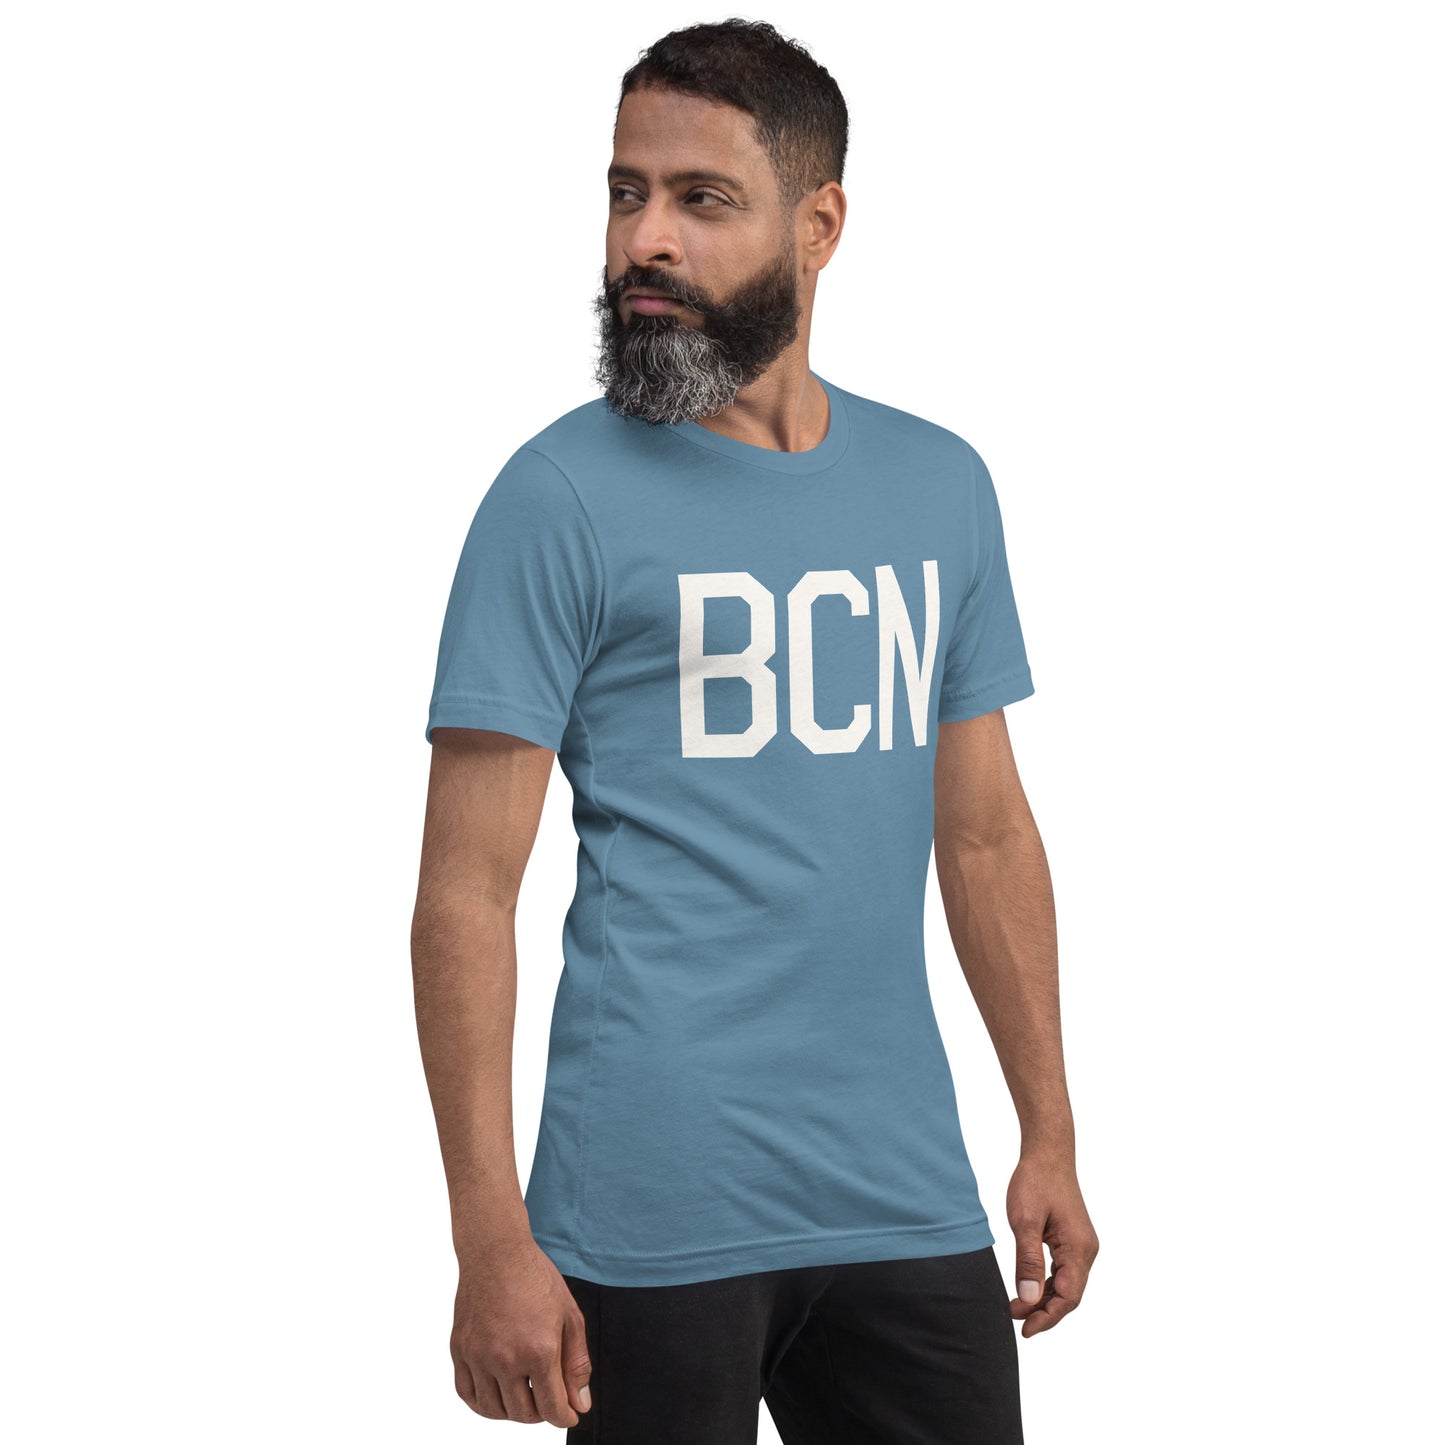 Airport Code T-Shirt - White Graphic • BCN Barcelona • YHM Designs - Image 10